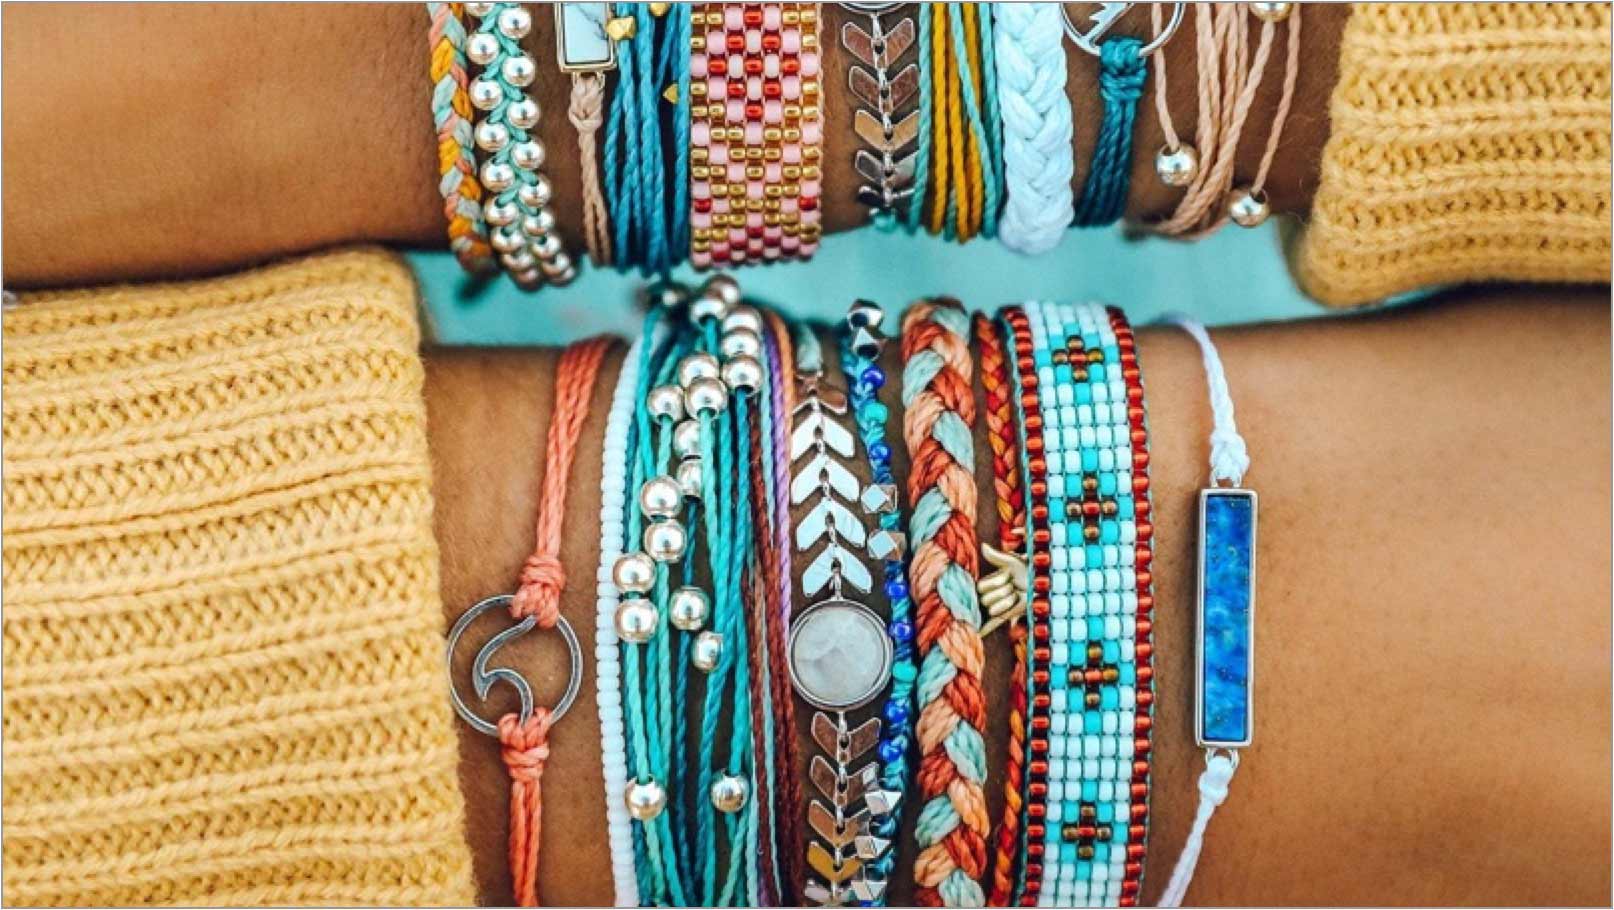 A close up of a woman’s arms wearing several Pura Vida bracelets